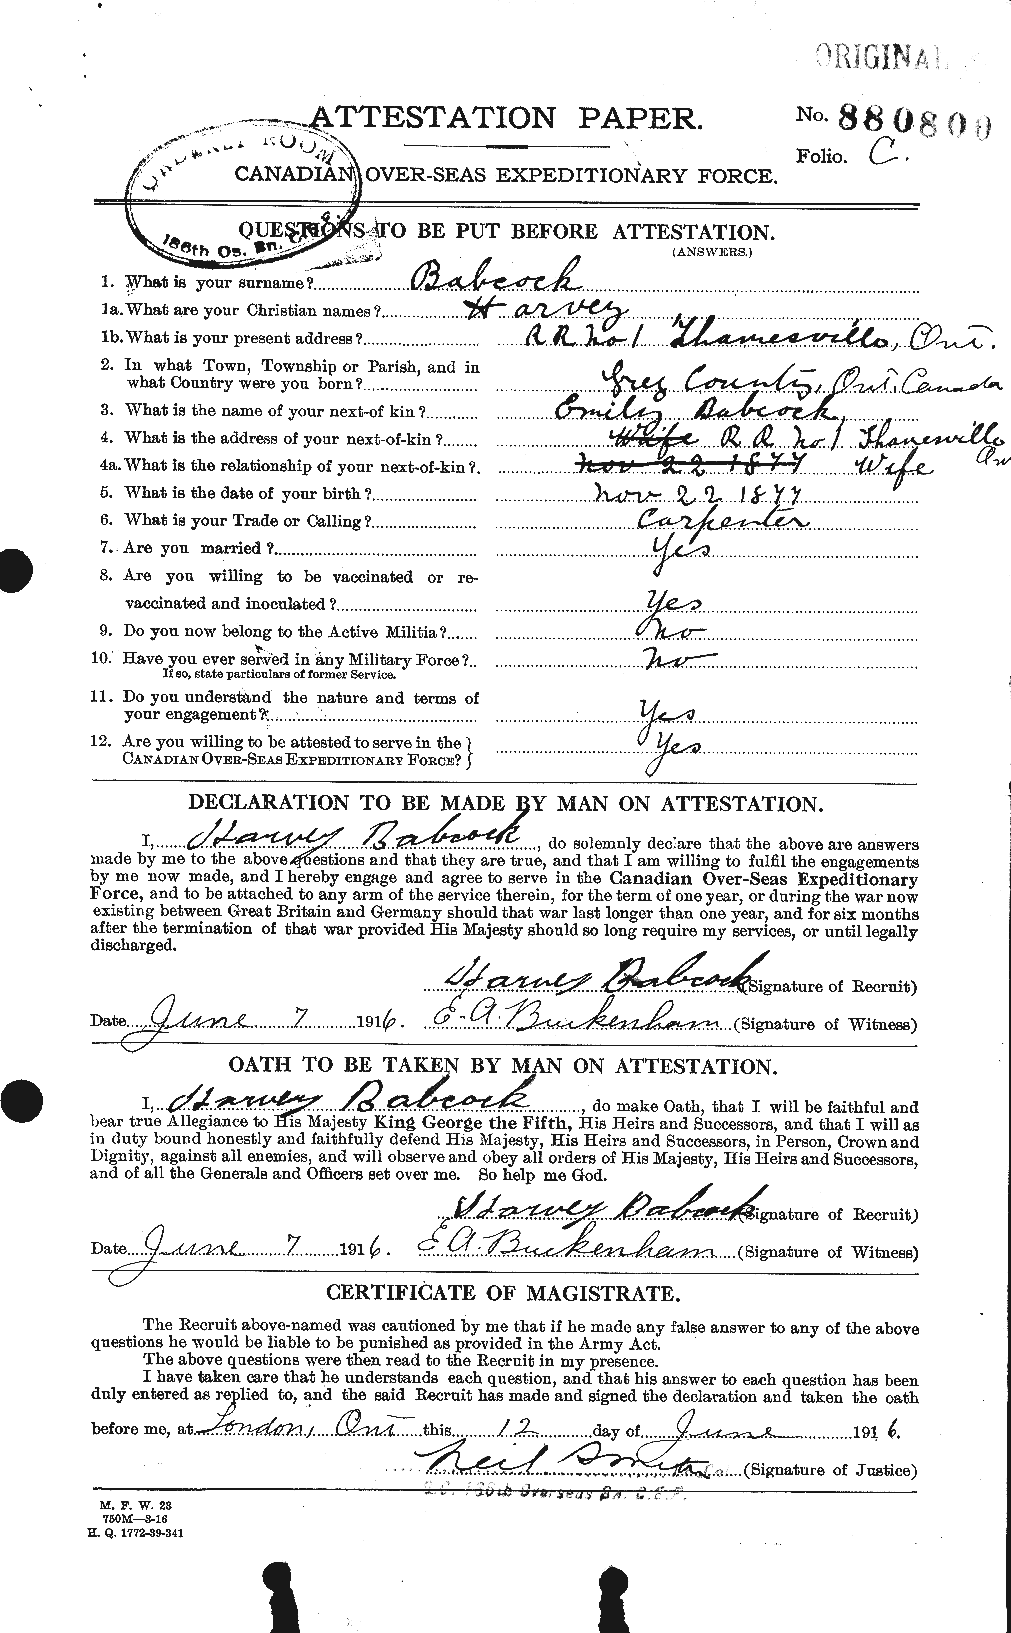 Personnel Records of the First World War - CEF 218236a